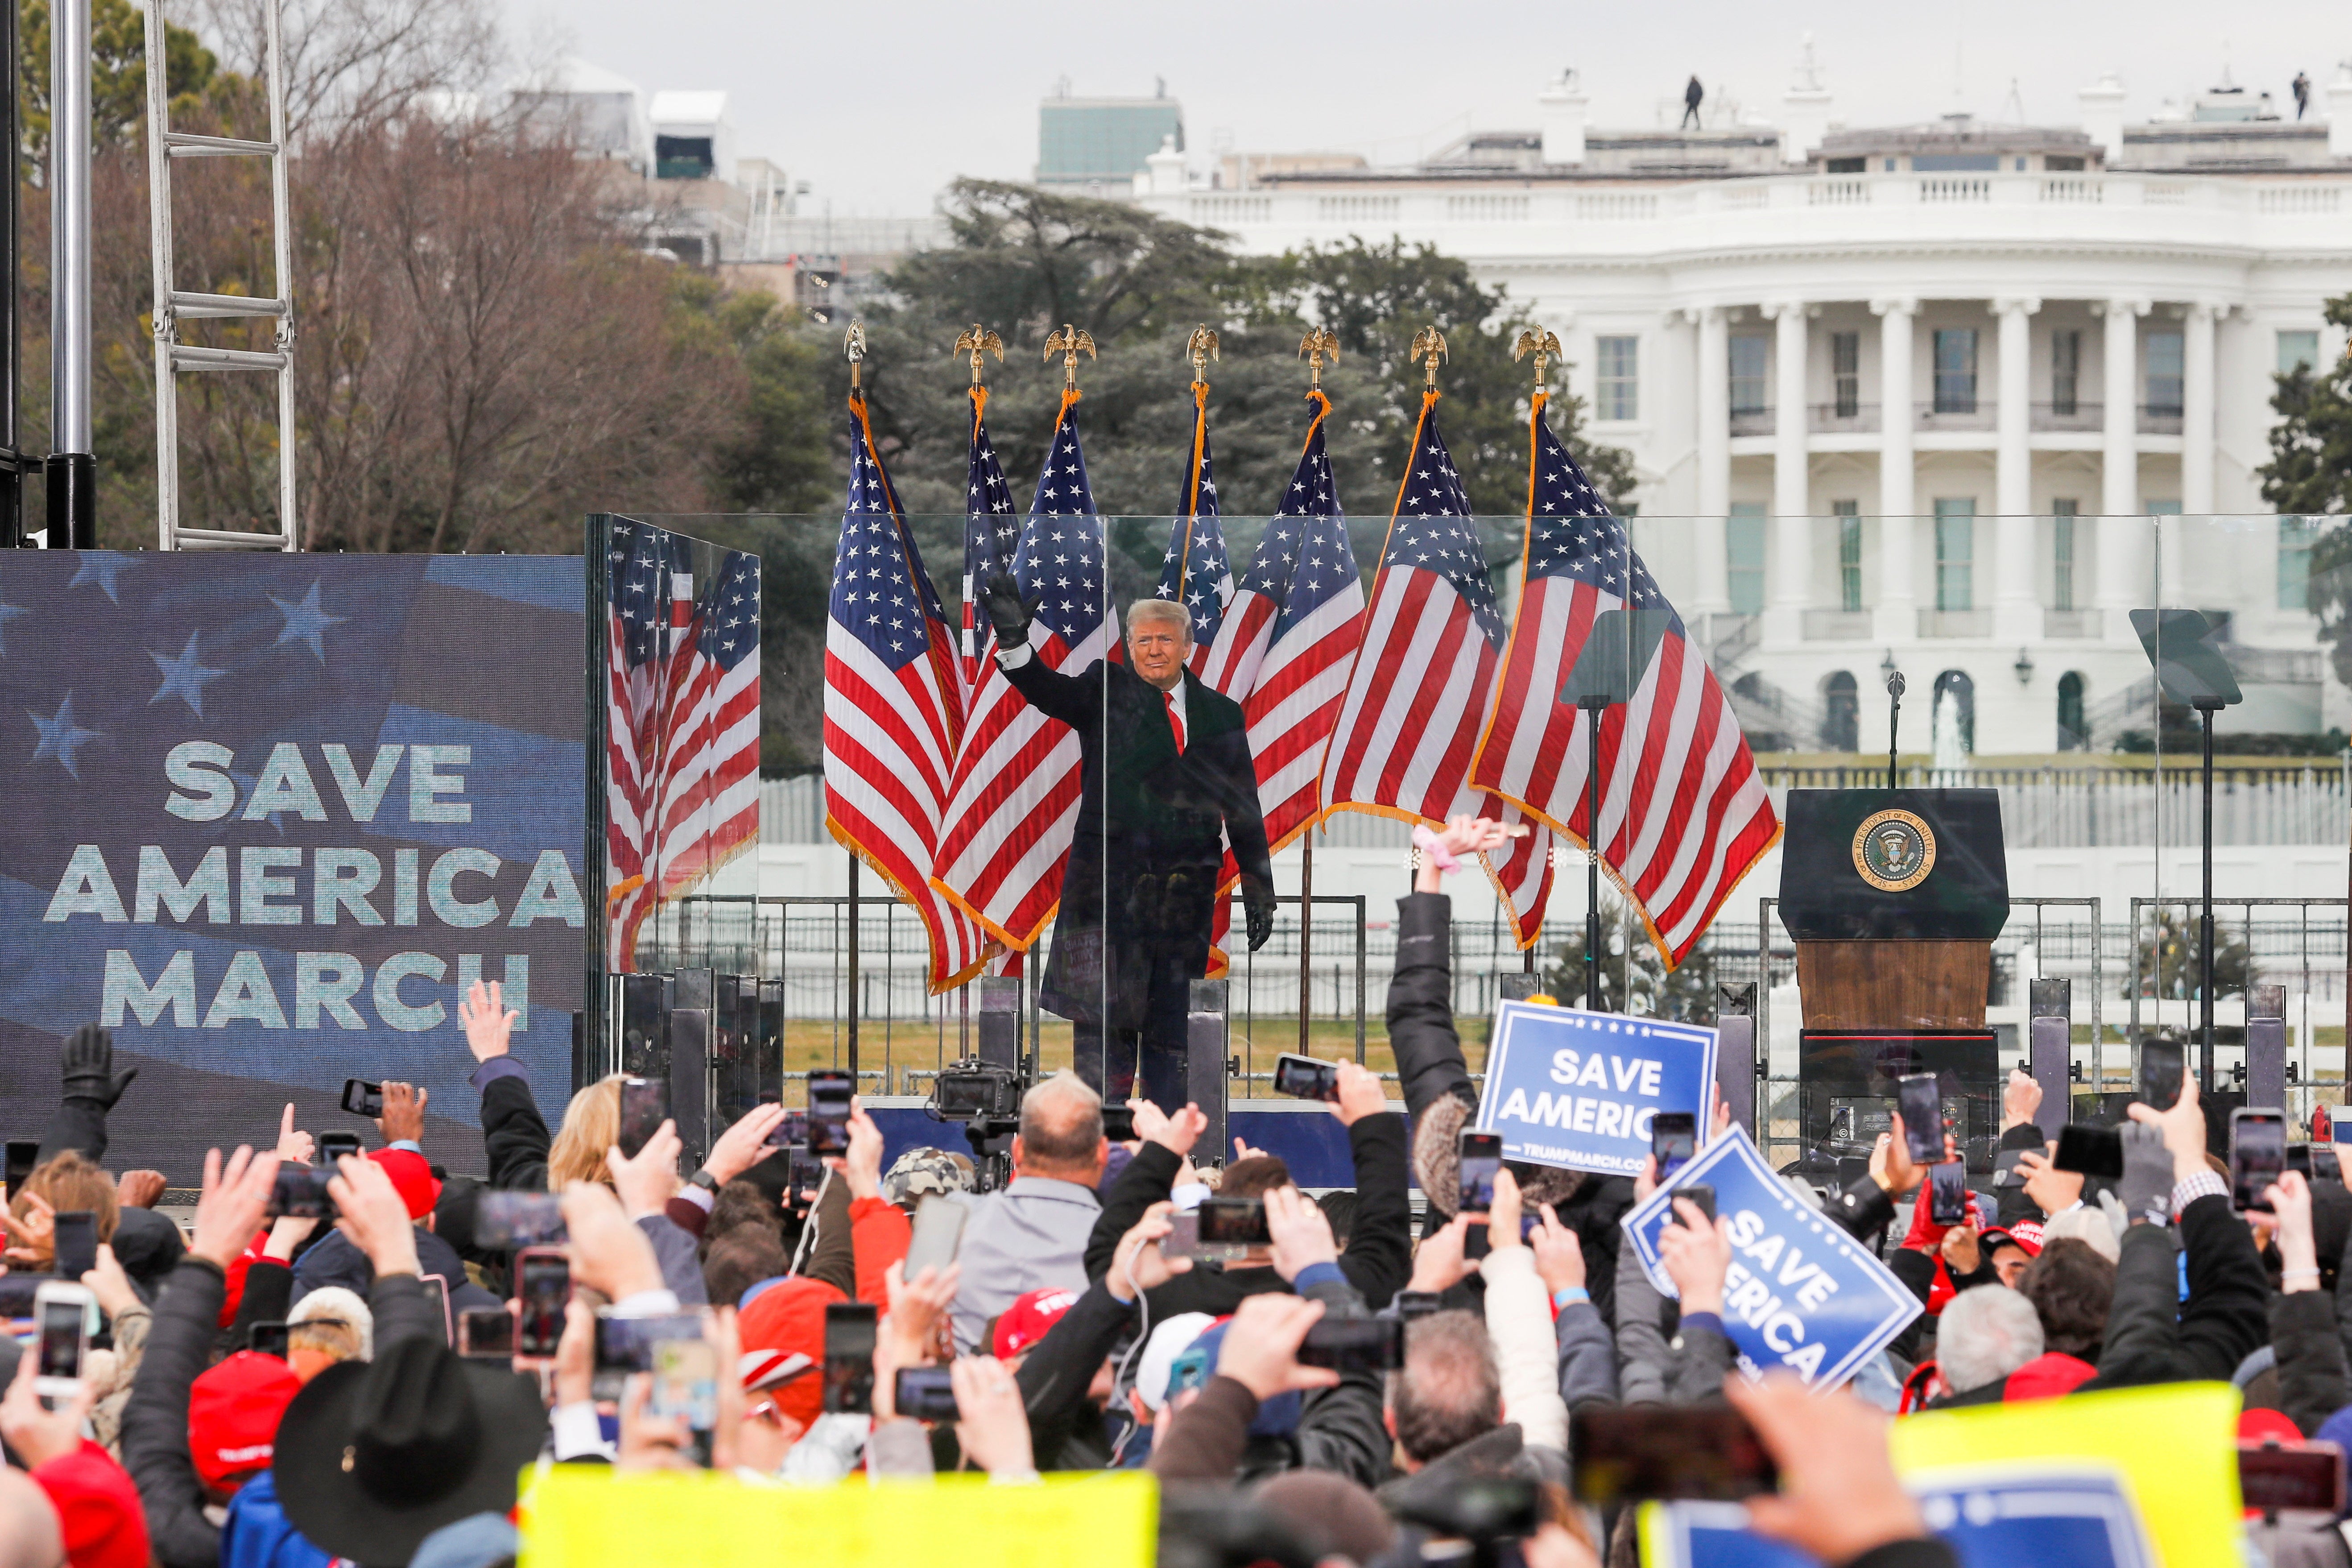 Donald Trump addresses supporters in Washington DC on January 6, 2021, before a mob stormed the Capitol to block the certification of Joe Biden’s election.